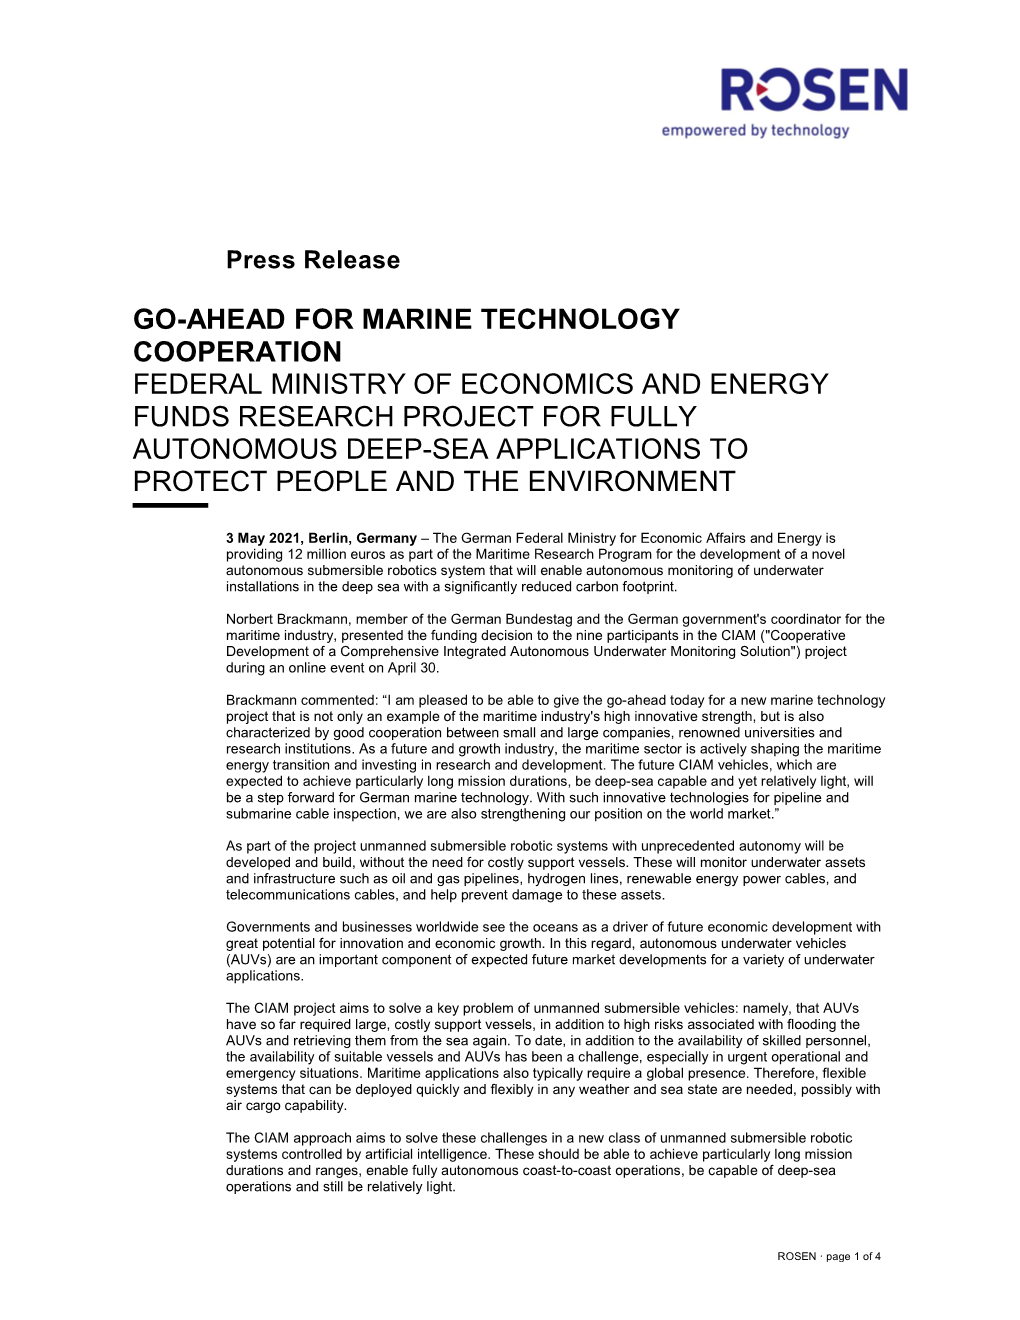 Go-Ahead for Marine Technology Cooperation